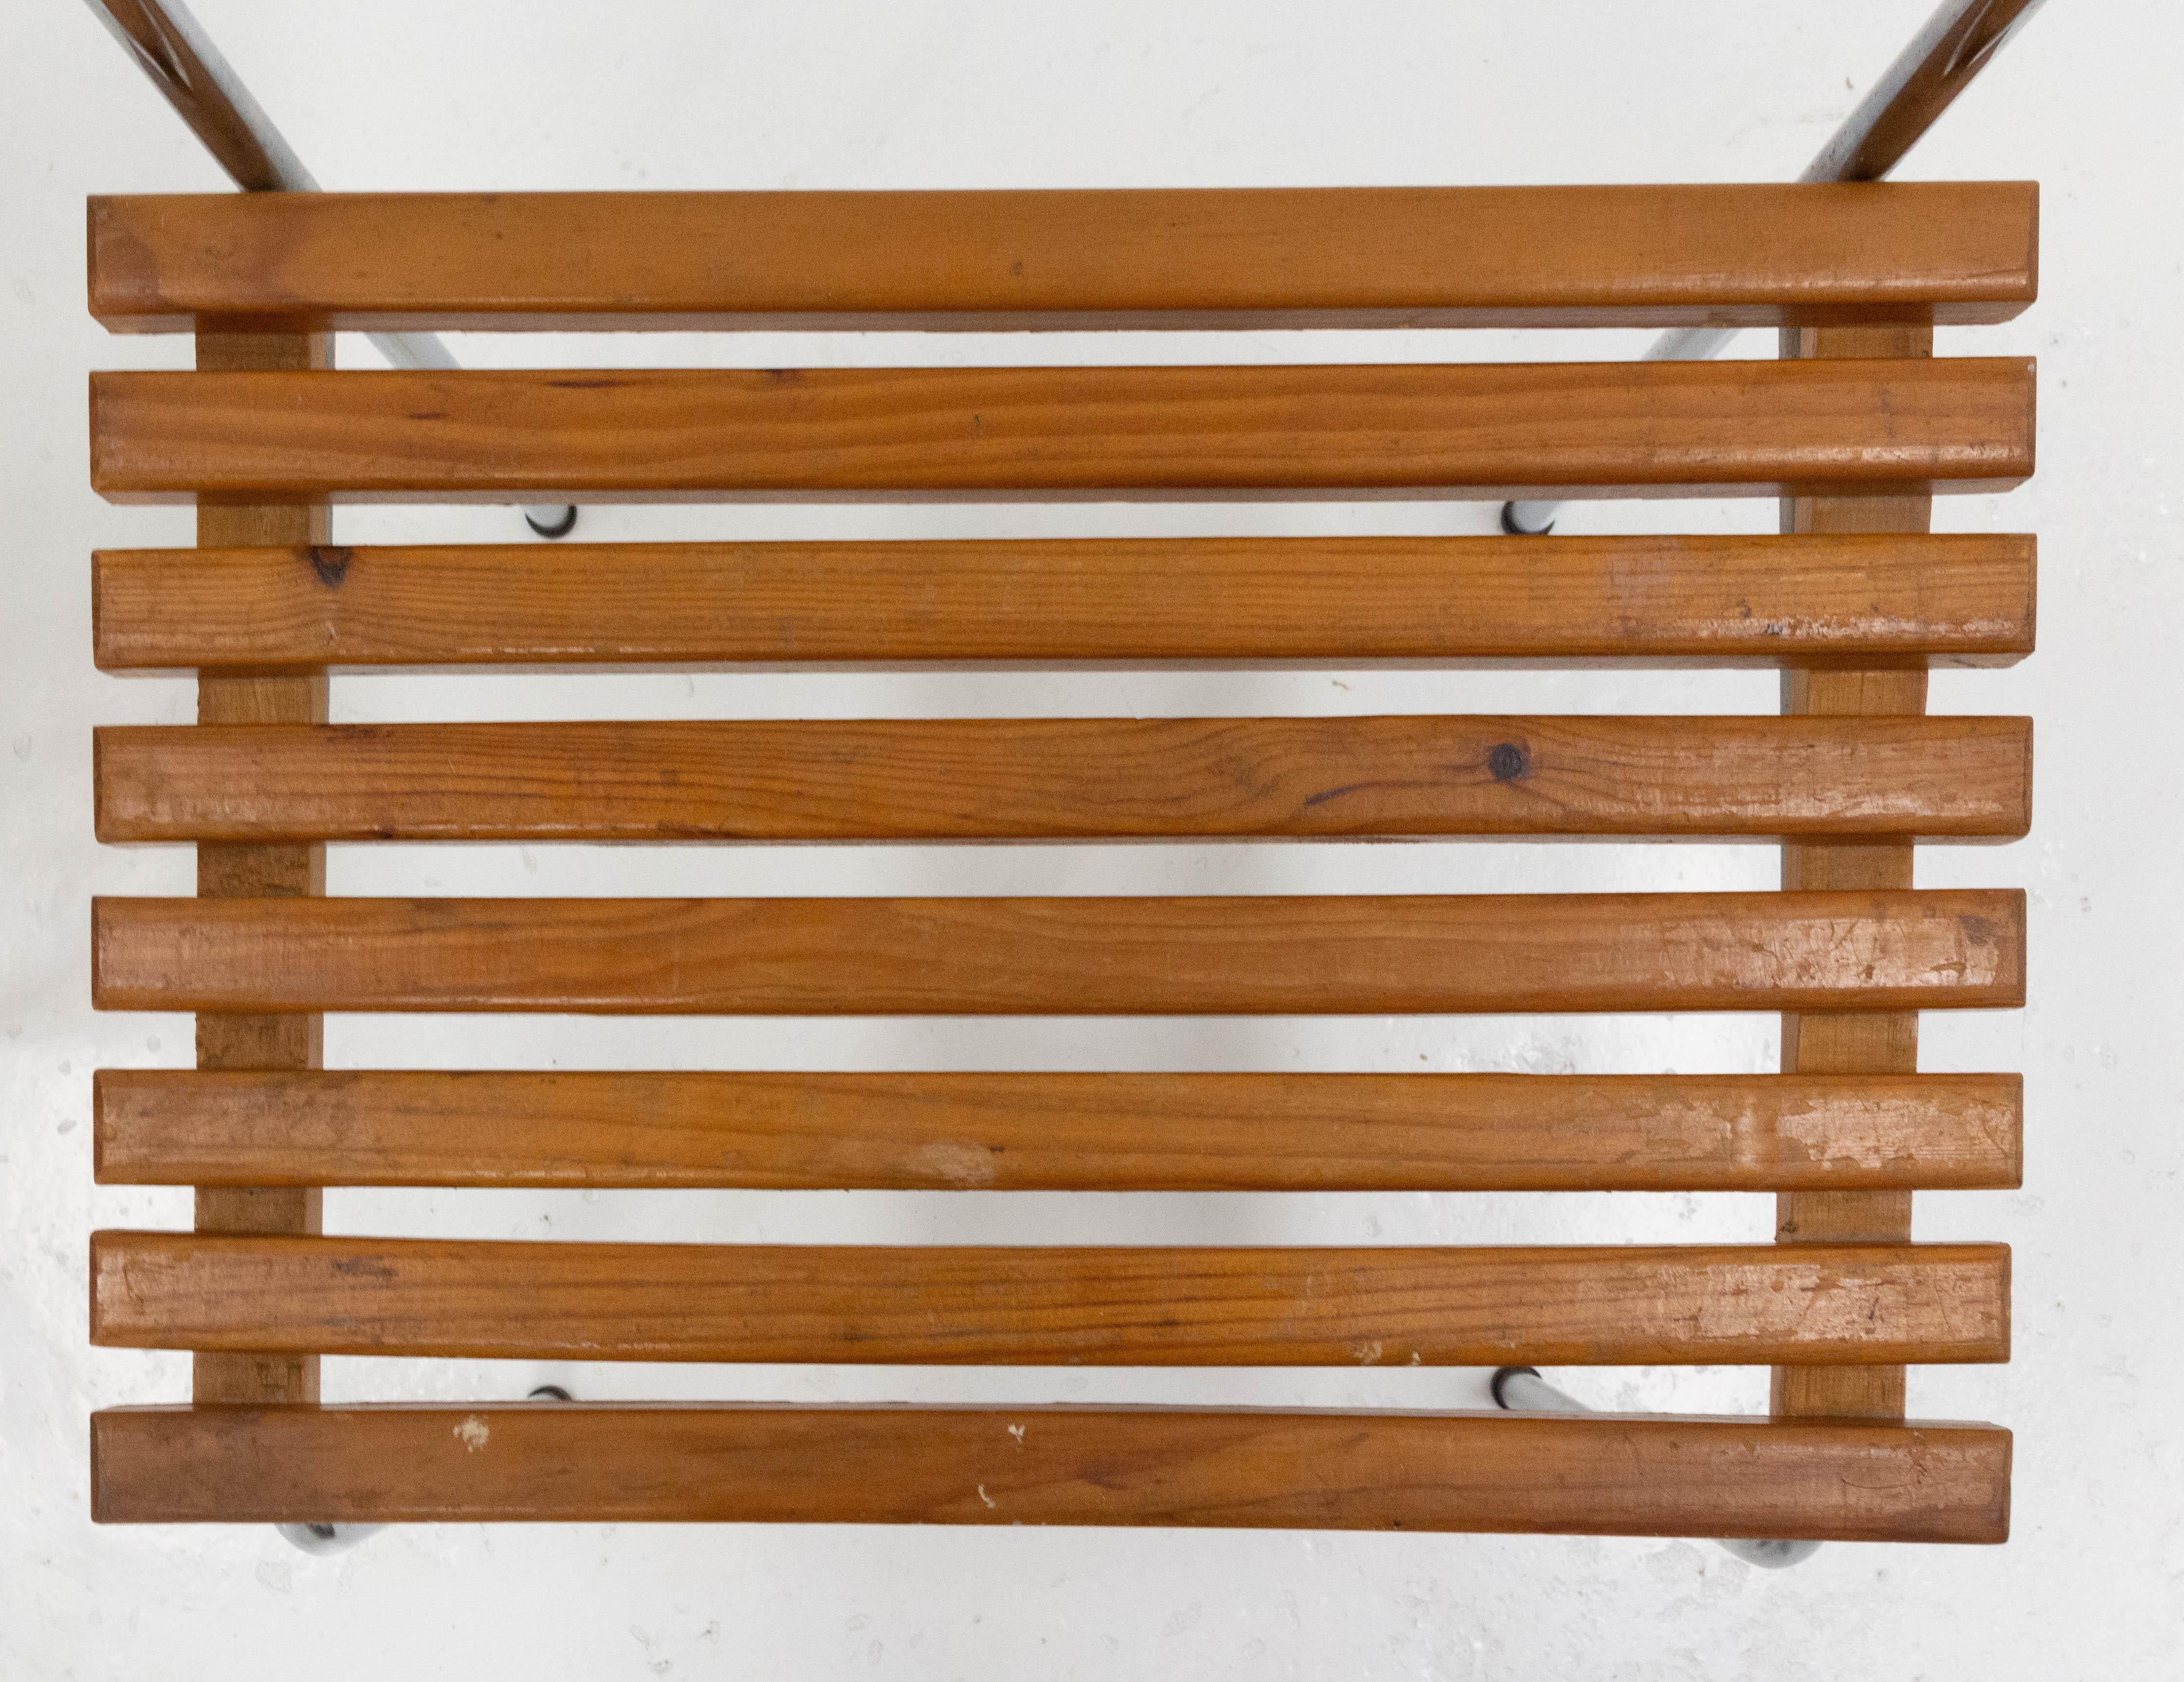 Charlotte Perriand Modernist Luggage Rack, Tubular Steel, Les Arcs, France, 1950 In Good Condition For Sale In Labrit, Landes